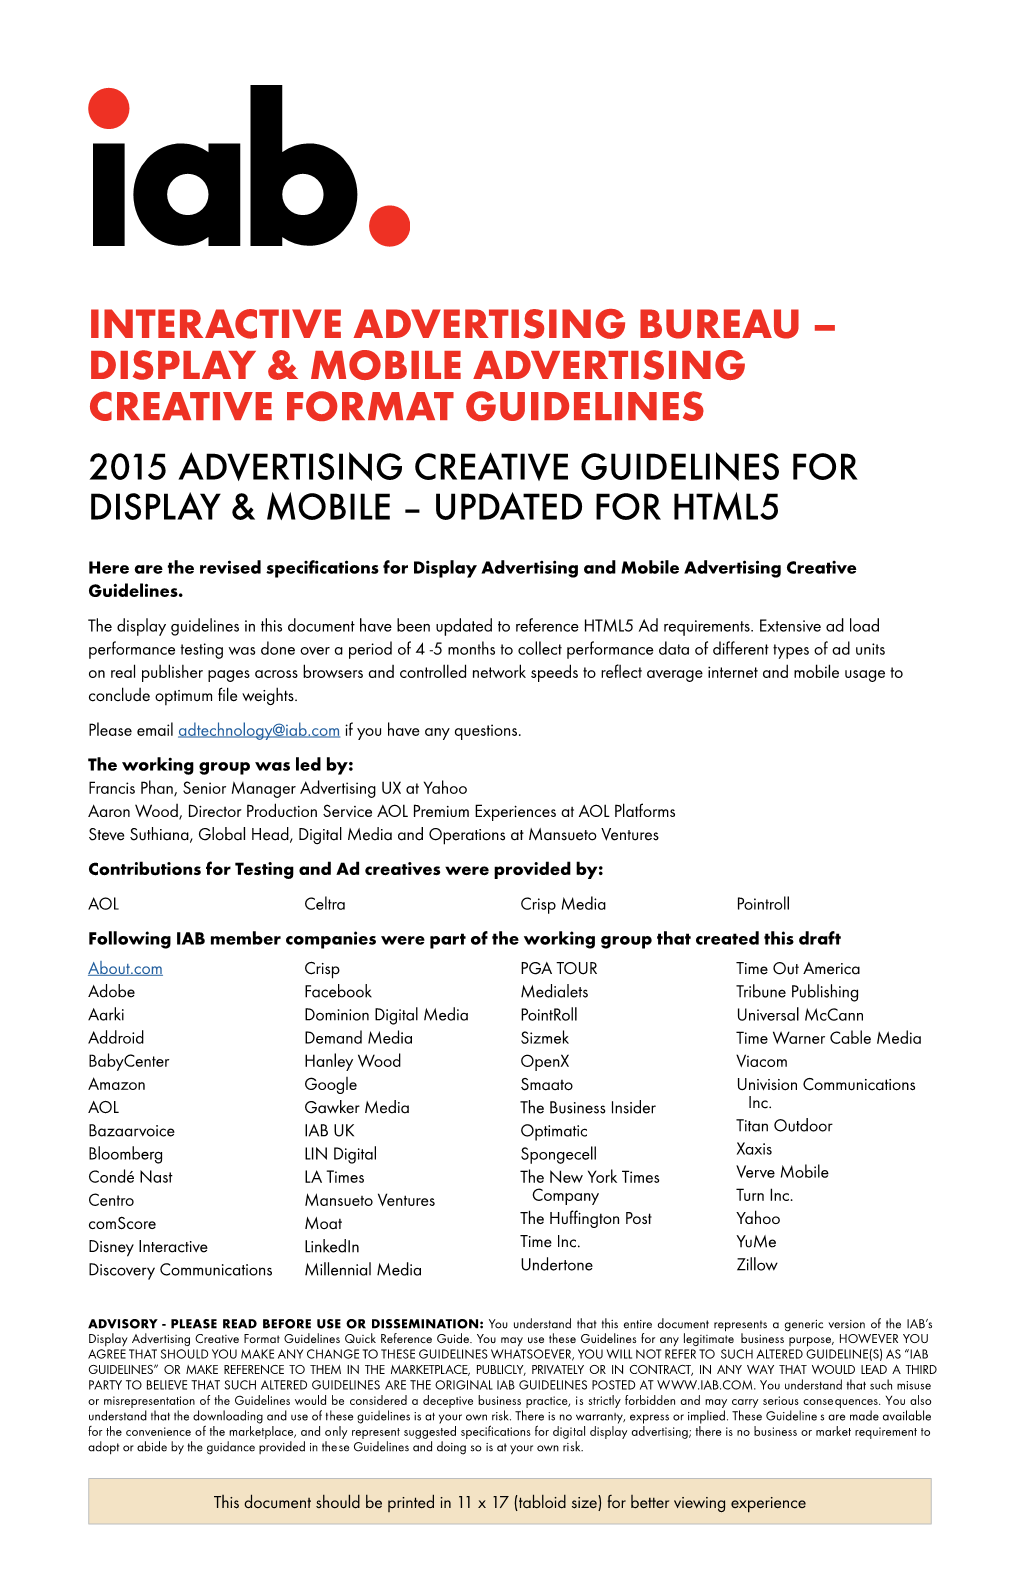 IAB Display & Mobile Advertising Creative Format Guidelines